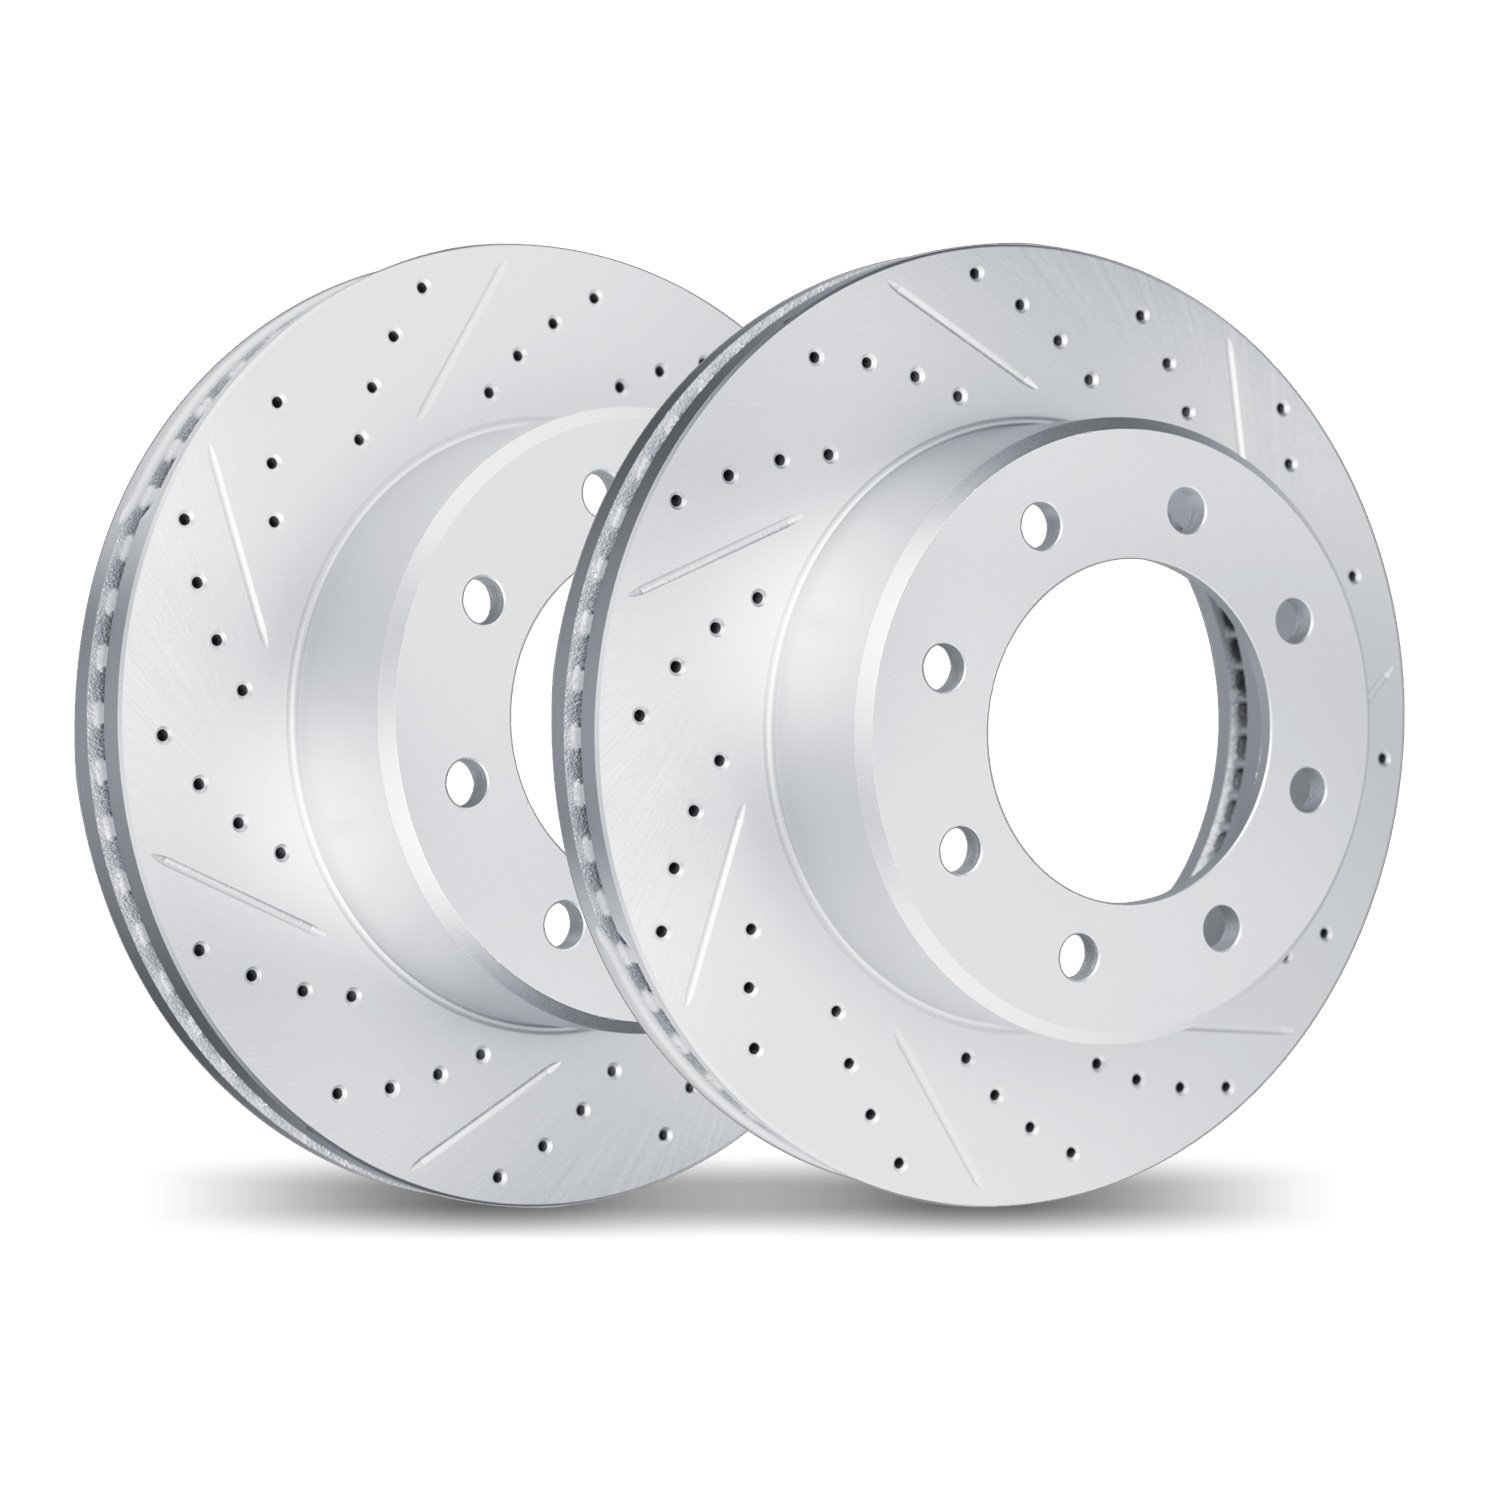 2002-54065 Geoperformance Drilled/Slotted Brake Rotors, 1999-1999 Ford/Lincoln/Mercury/Mazda, Position: Front